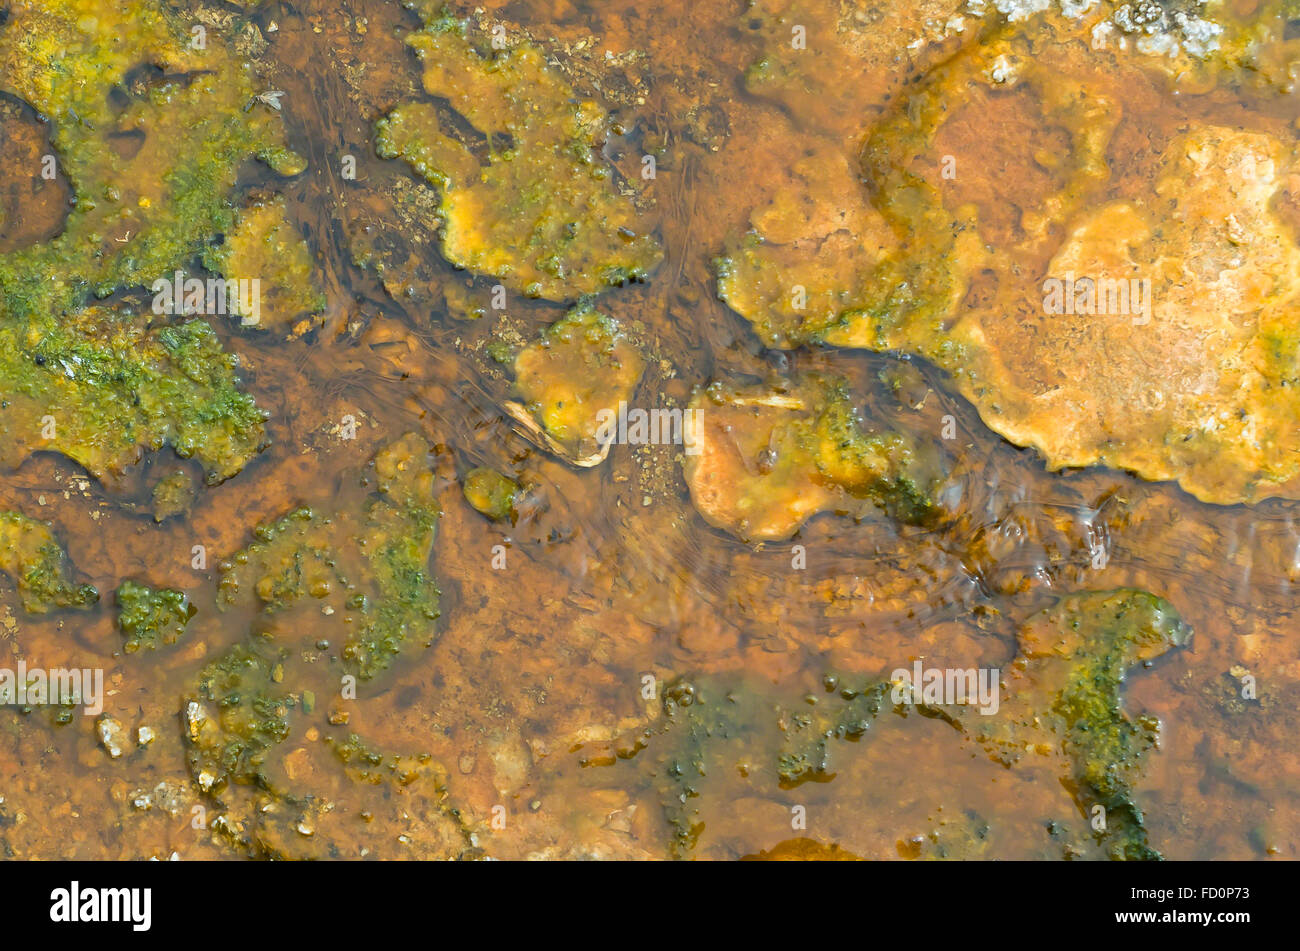 Colorful algae and bacteria grow in hot geothermal runoff from a hot pool in Yellowstone National Park. Stock Photo